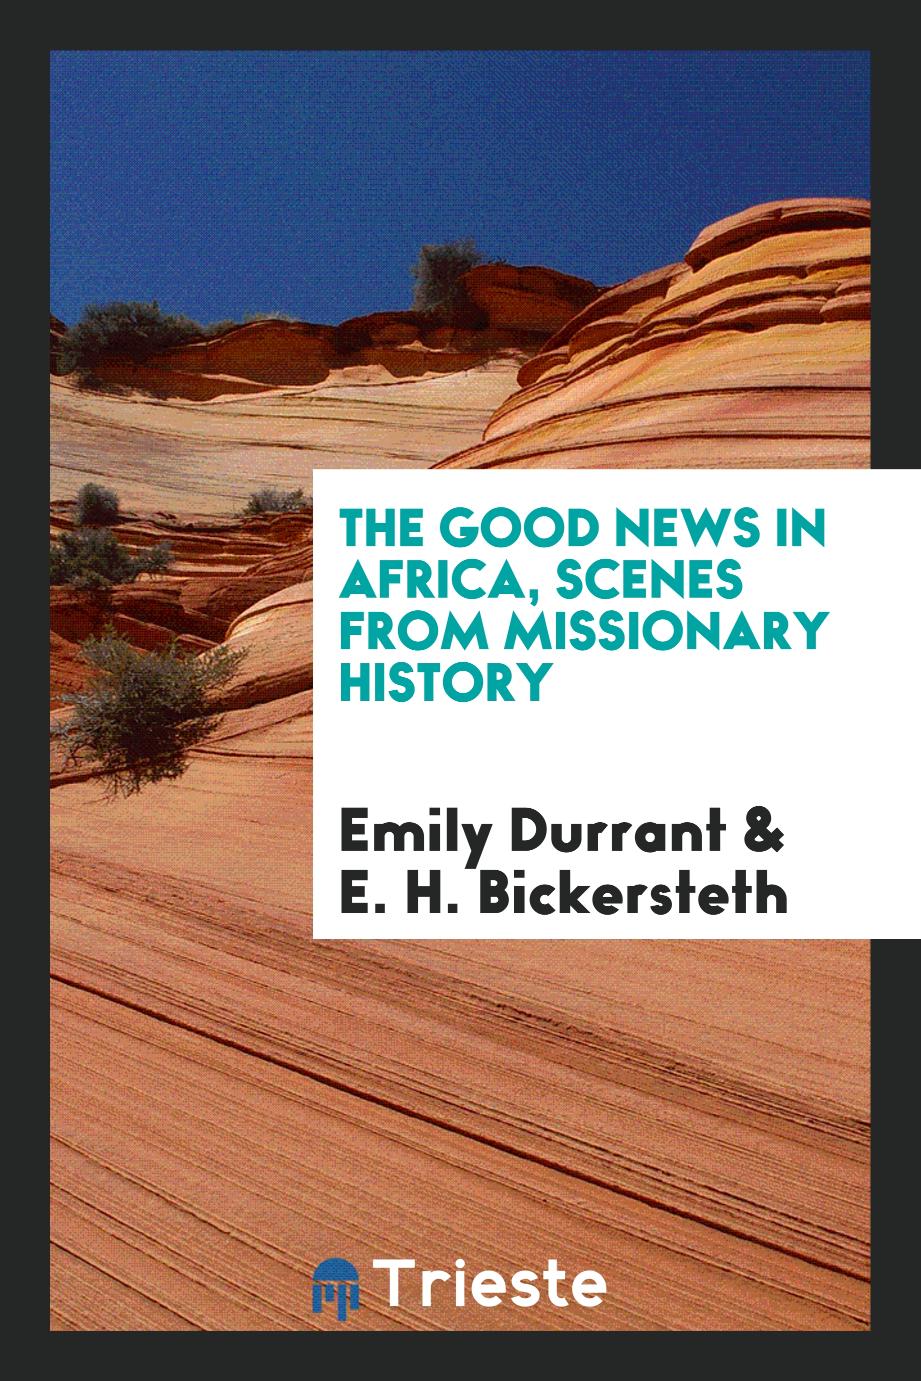 The Good News in Africa, Scenes from Missionary History